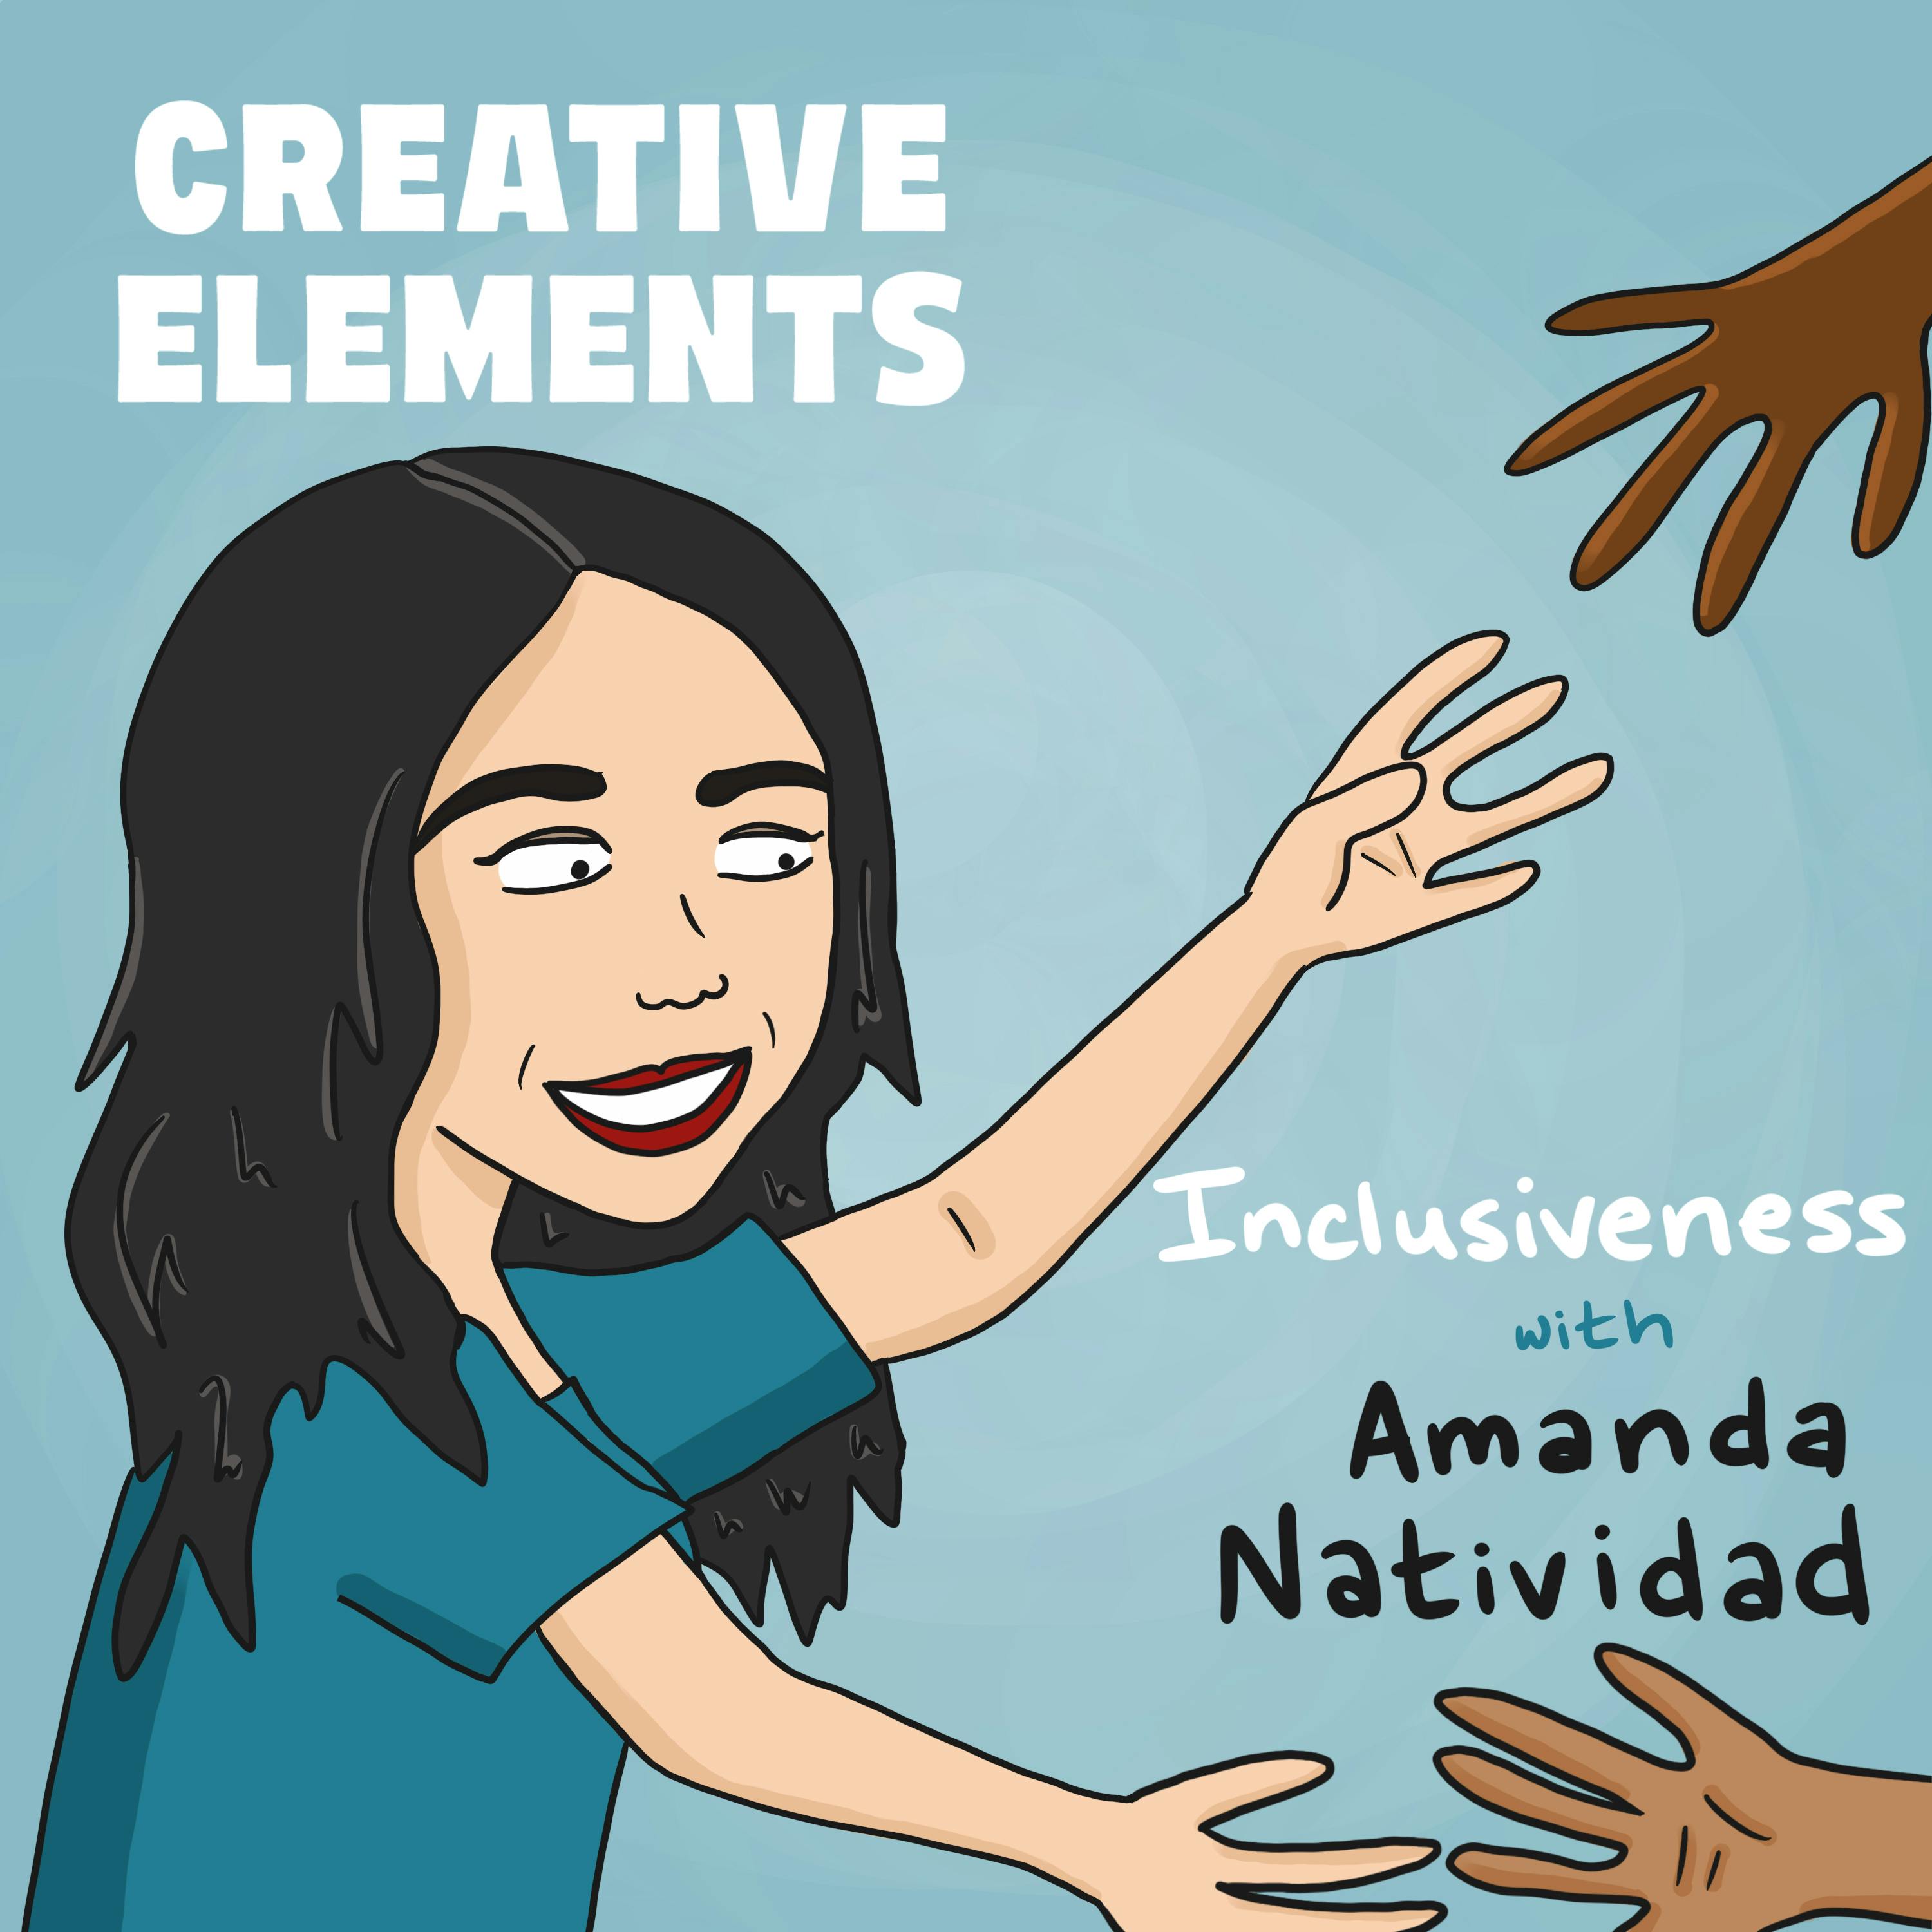 #99: Amanda Natividad [Inclusiveness] – Growing on Twitter and using her platform to lift up others